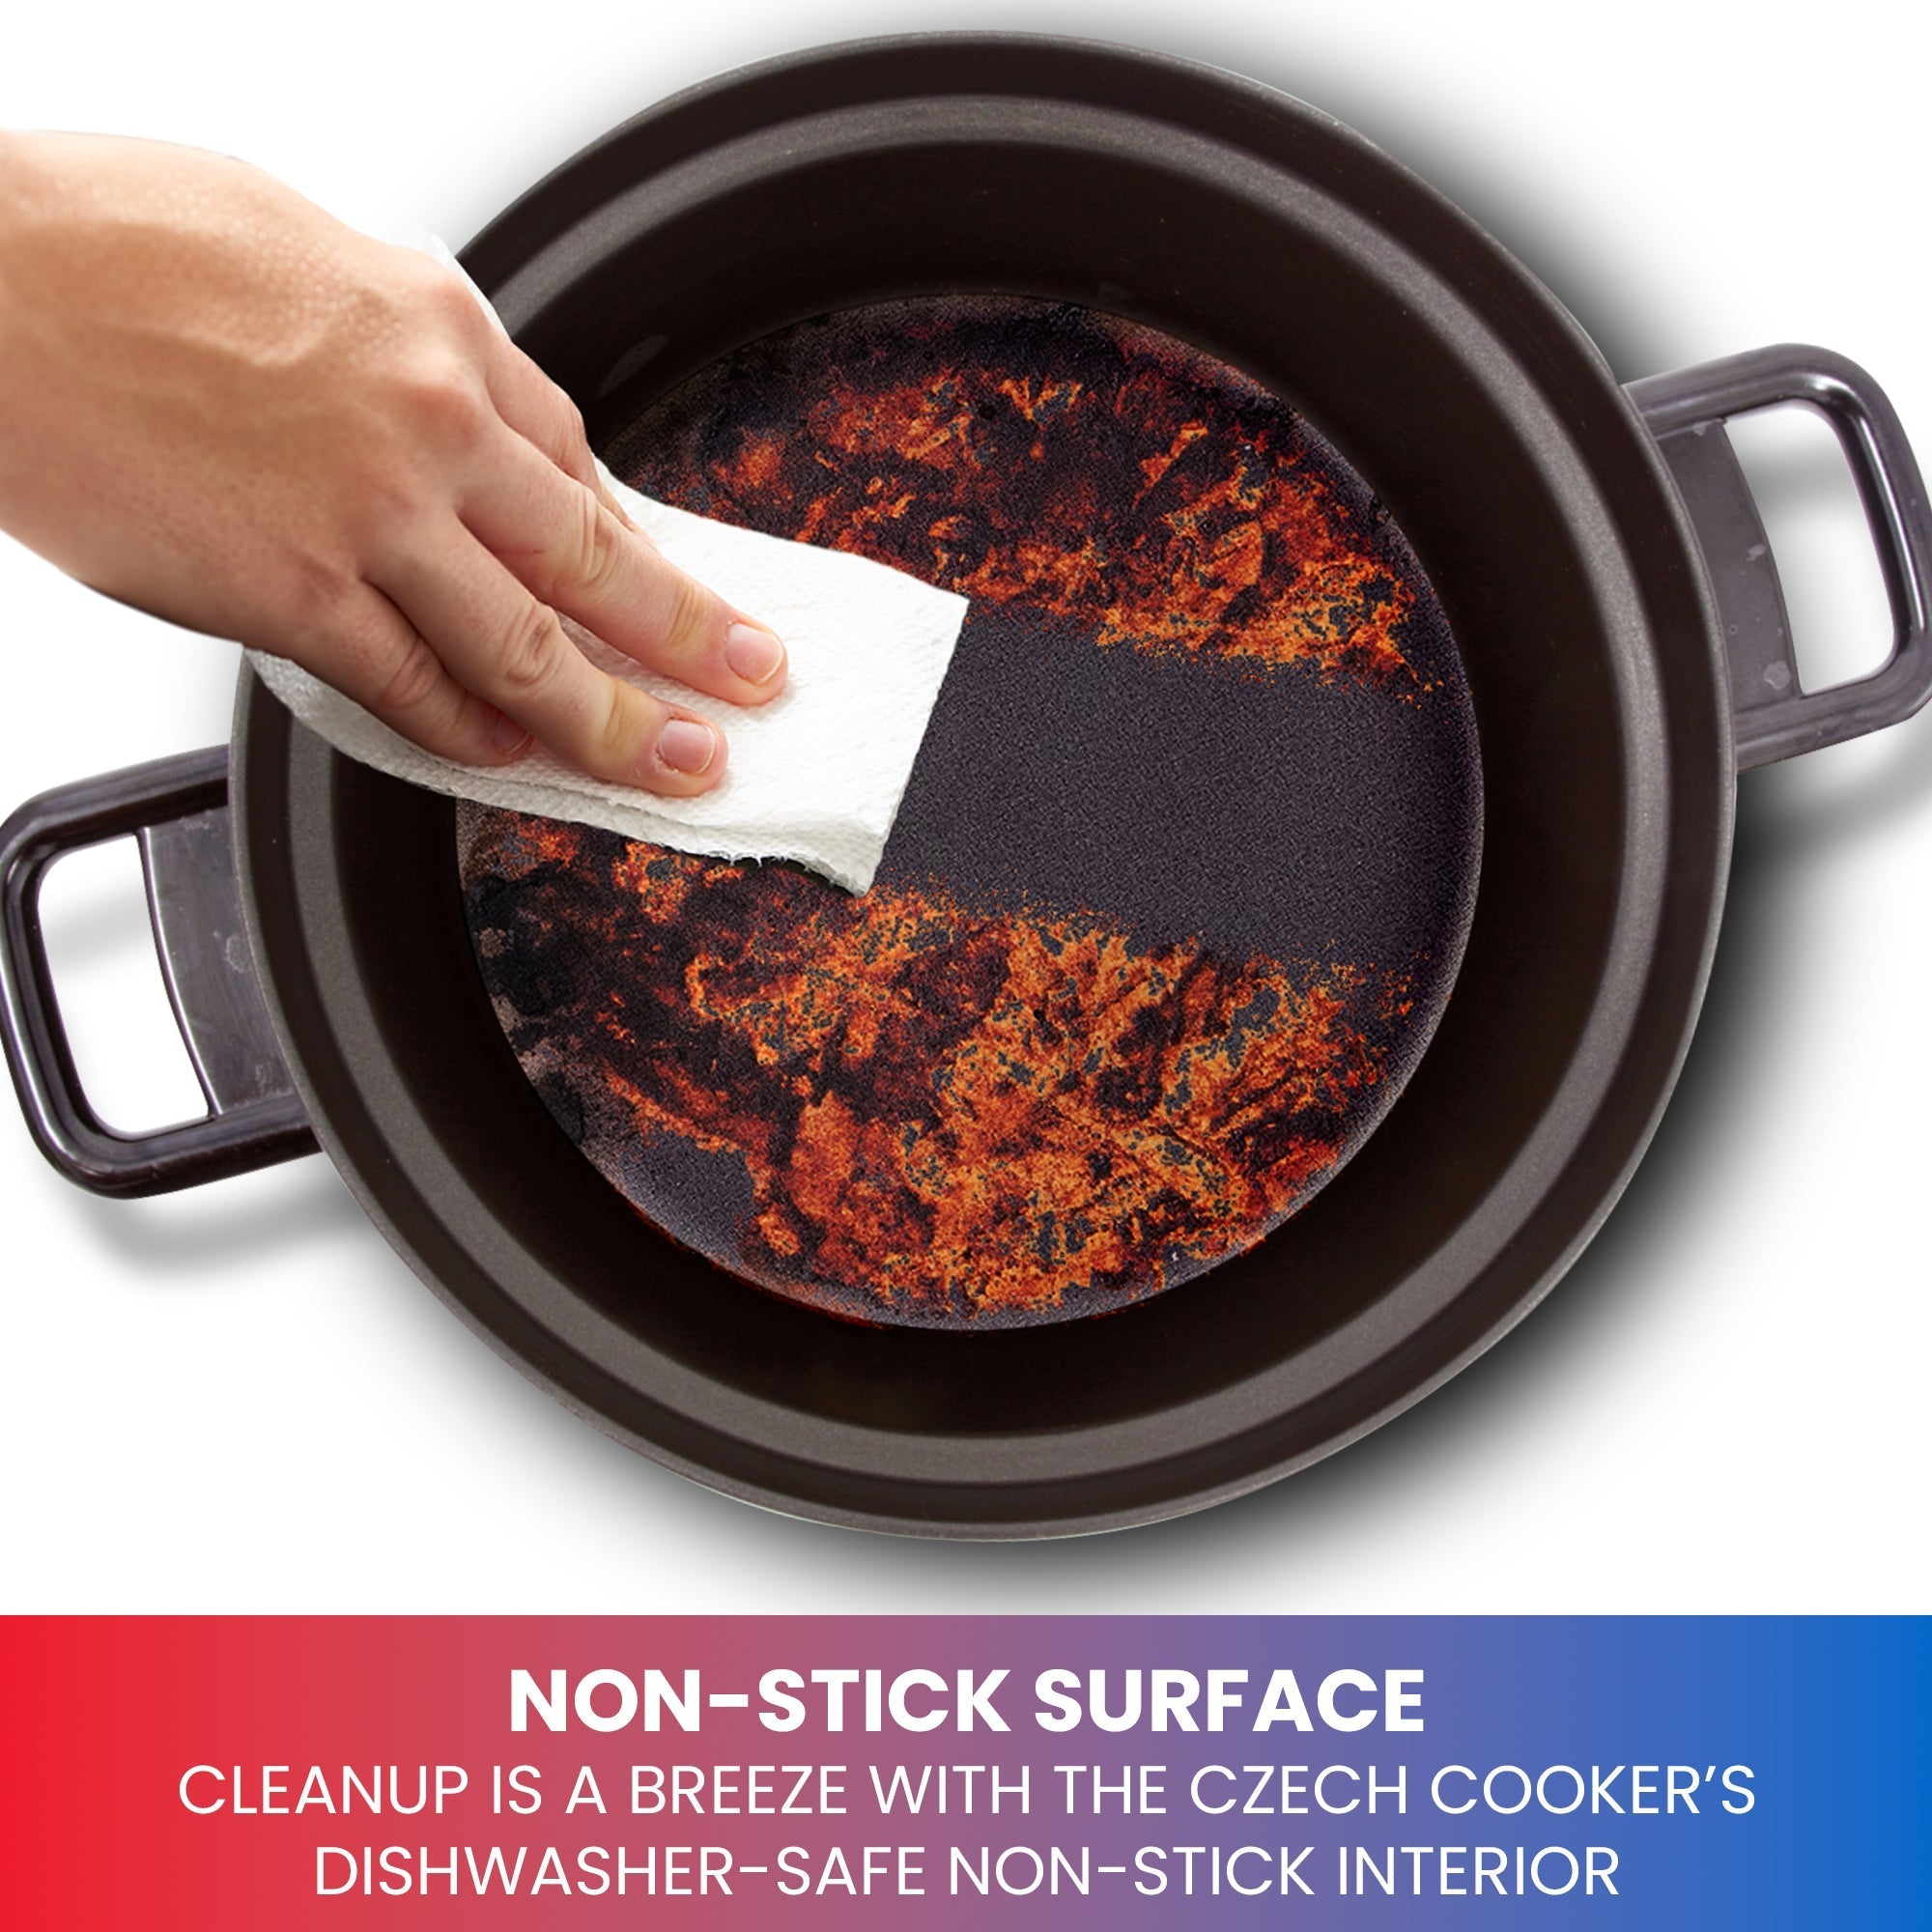 Product shot of cooking pot from above with a person's hand using a white sponge to wipe off food residue. Text below reads, "Non-stick surface: Cleanup is a breeze with the Czech cooker's dishwasher-safe non-stick interior"